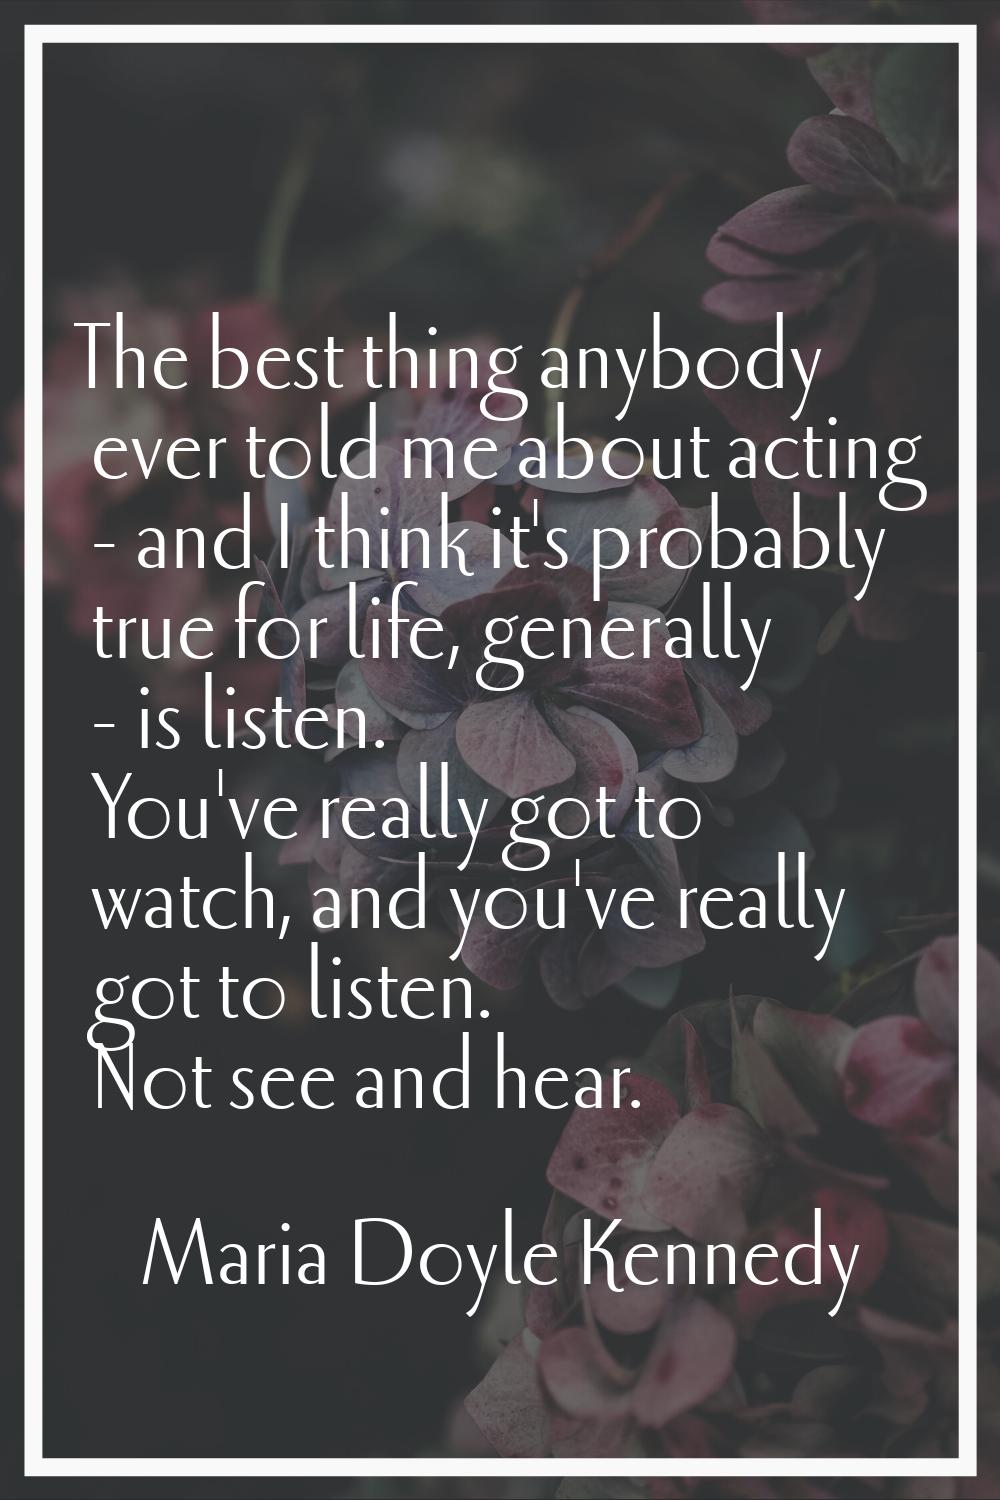 The best thing anybody ever told me about acting - and I think it's probably true for life, general